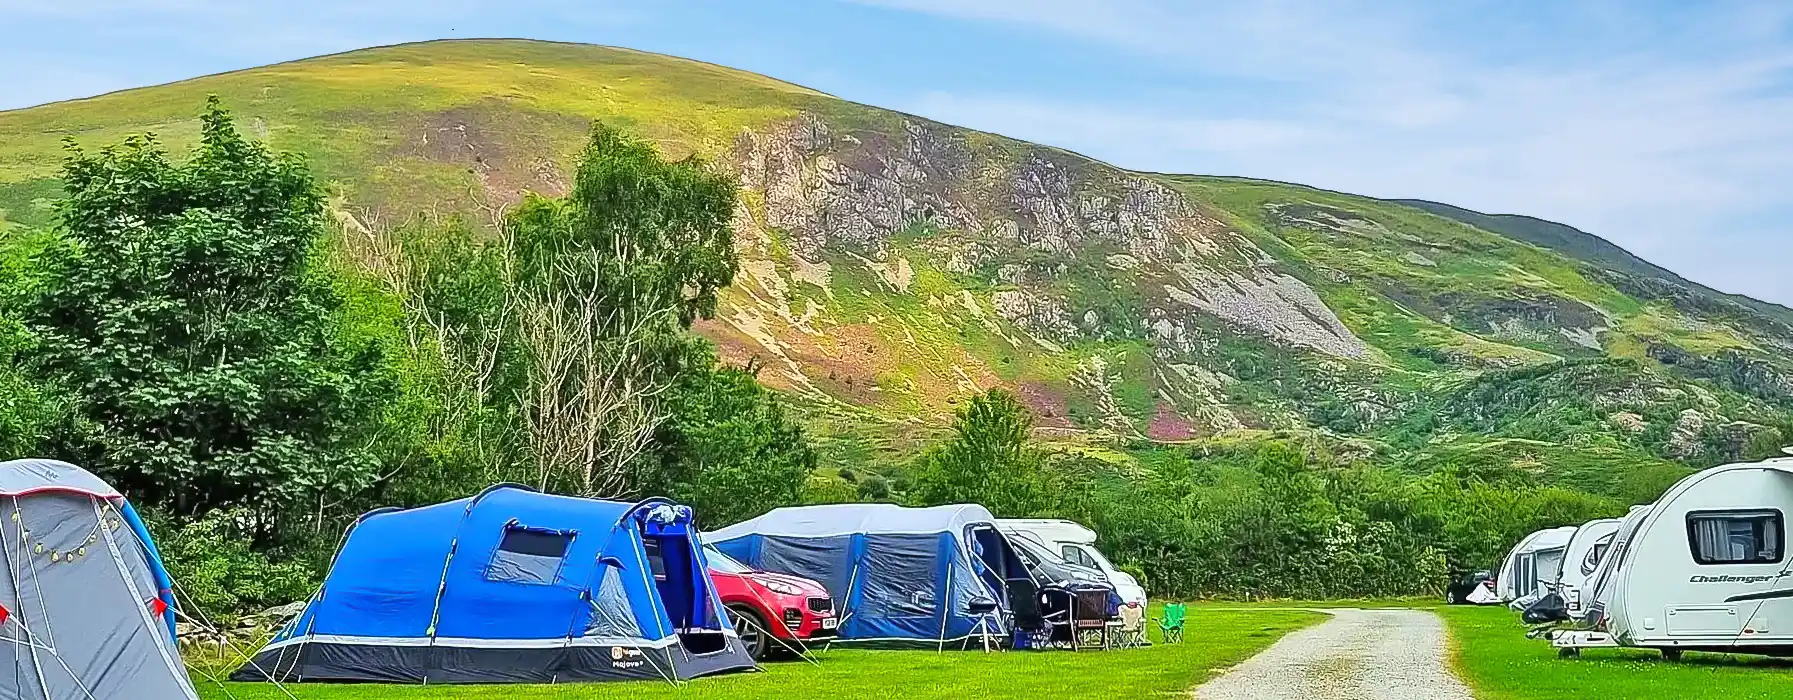 All year round campsites in North Wales